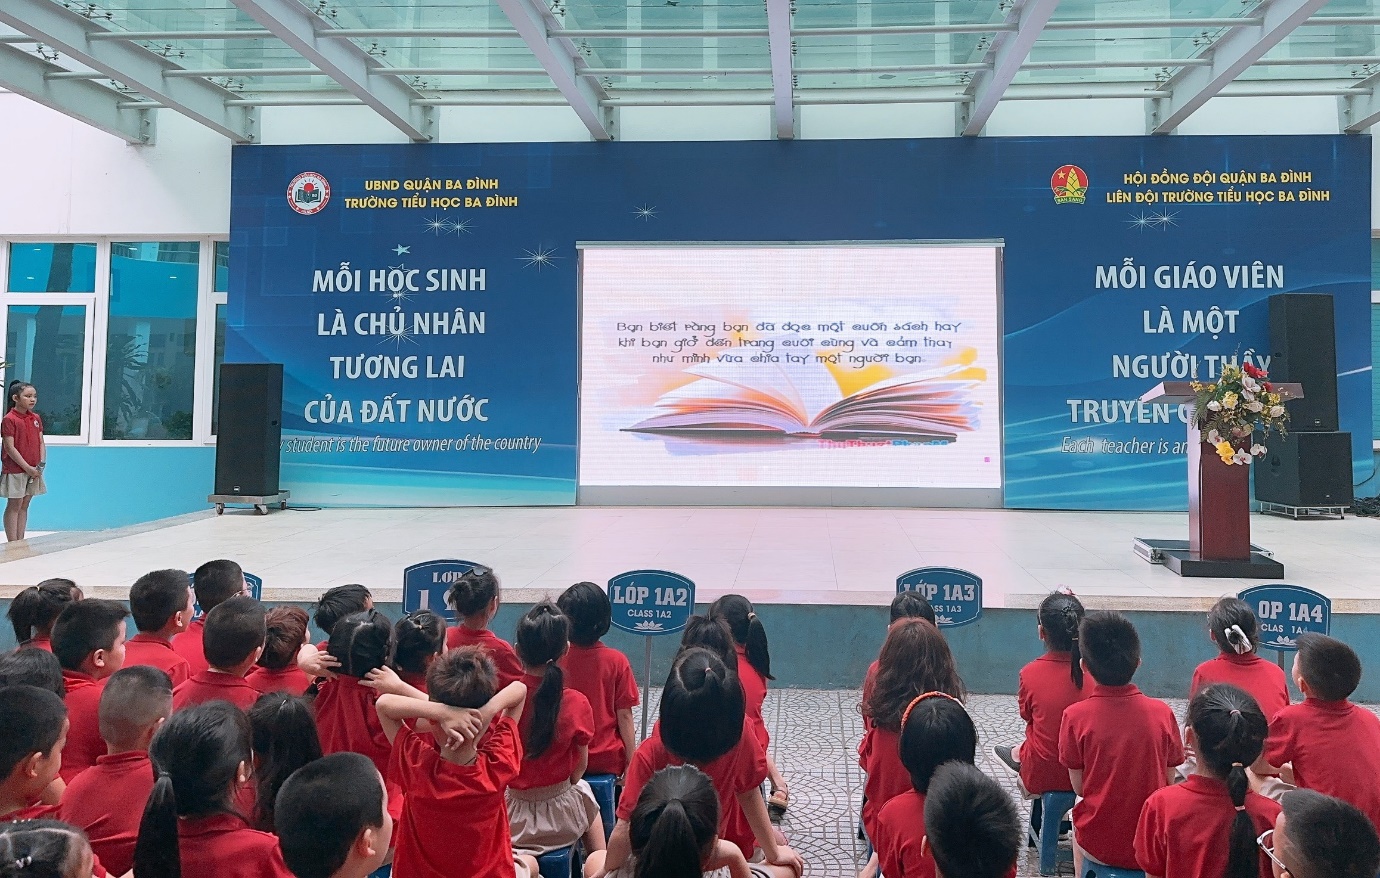 A group of children in red shirts standing in front of a screen

Description automatically generated